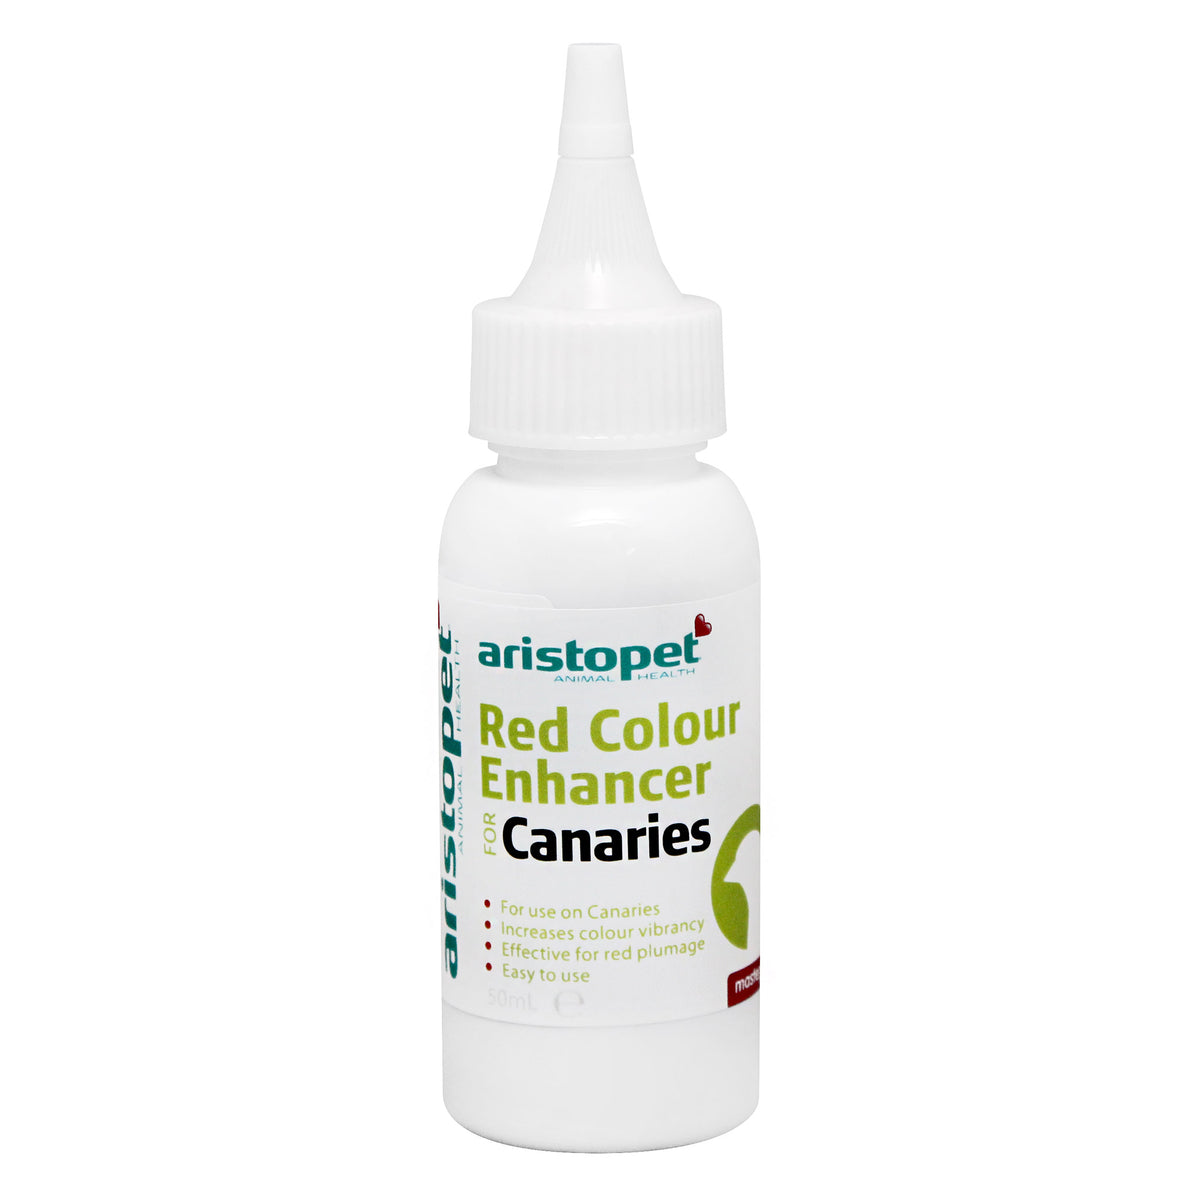 Aristopet Red Colour Enhancer for Canaries